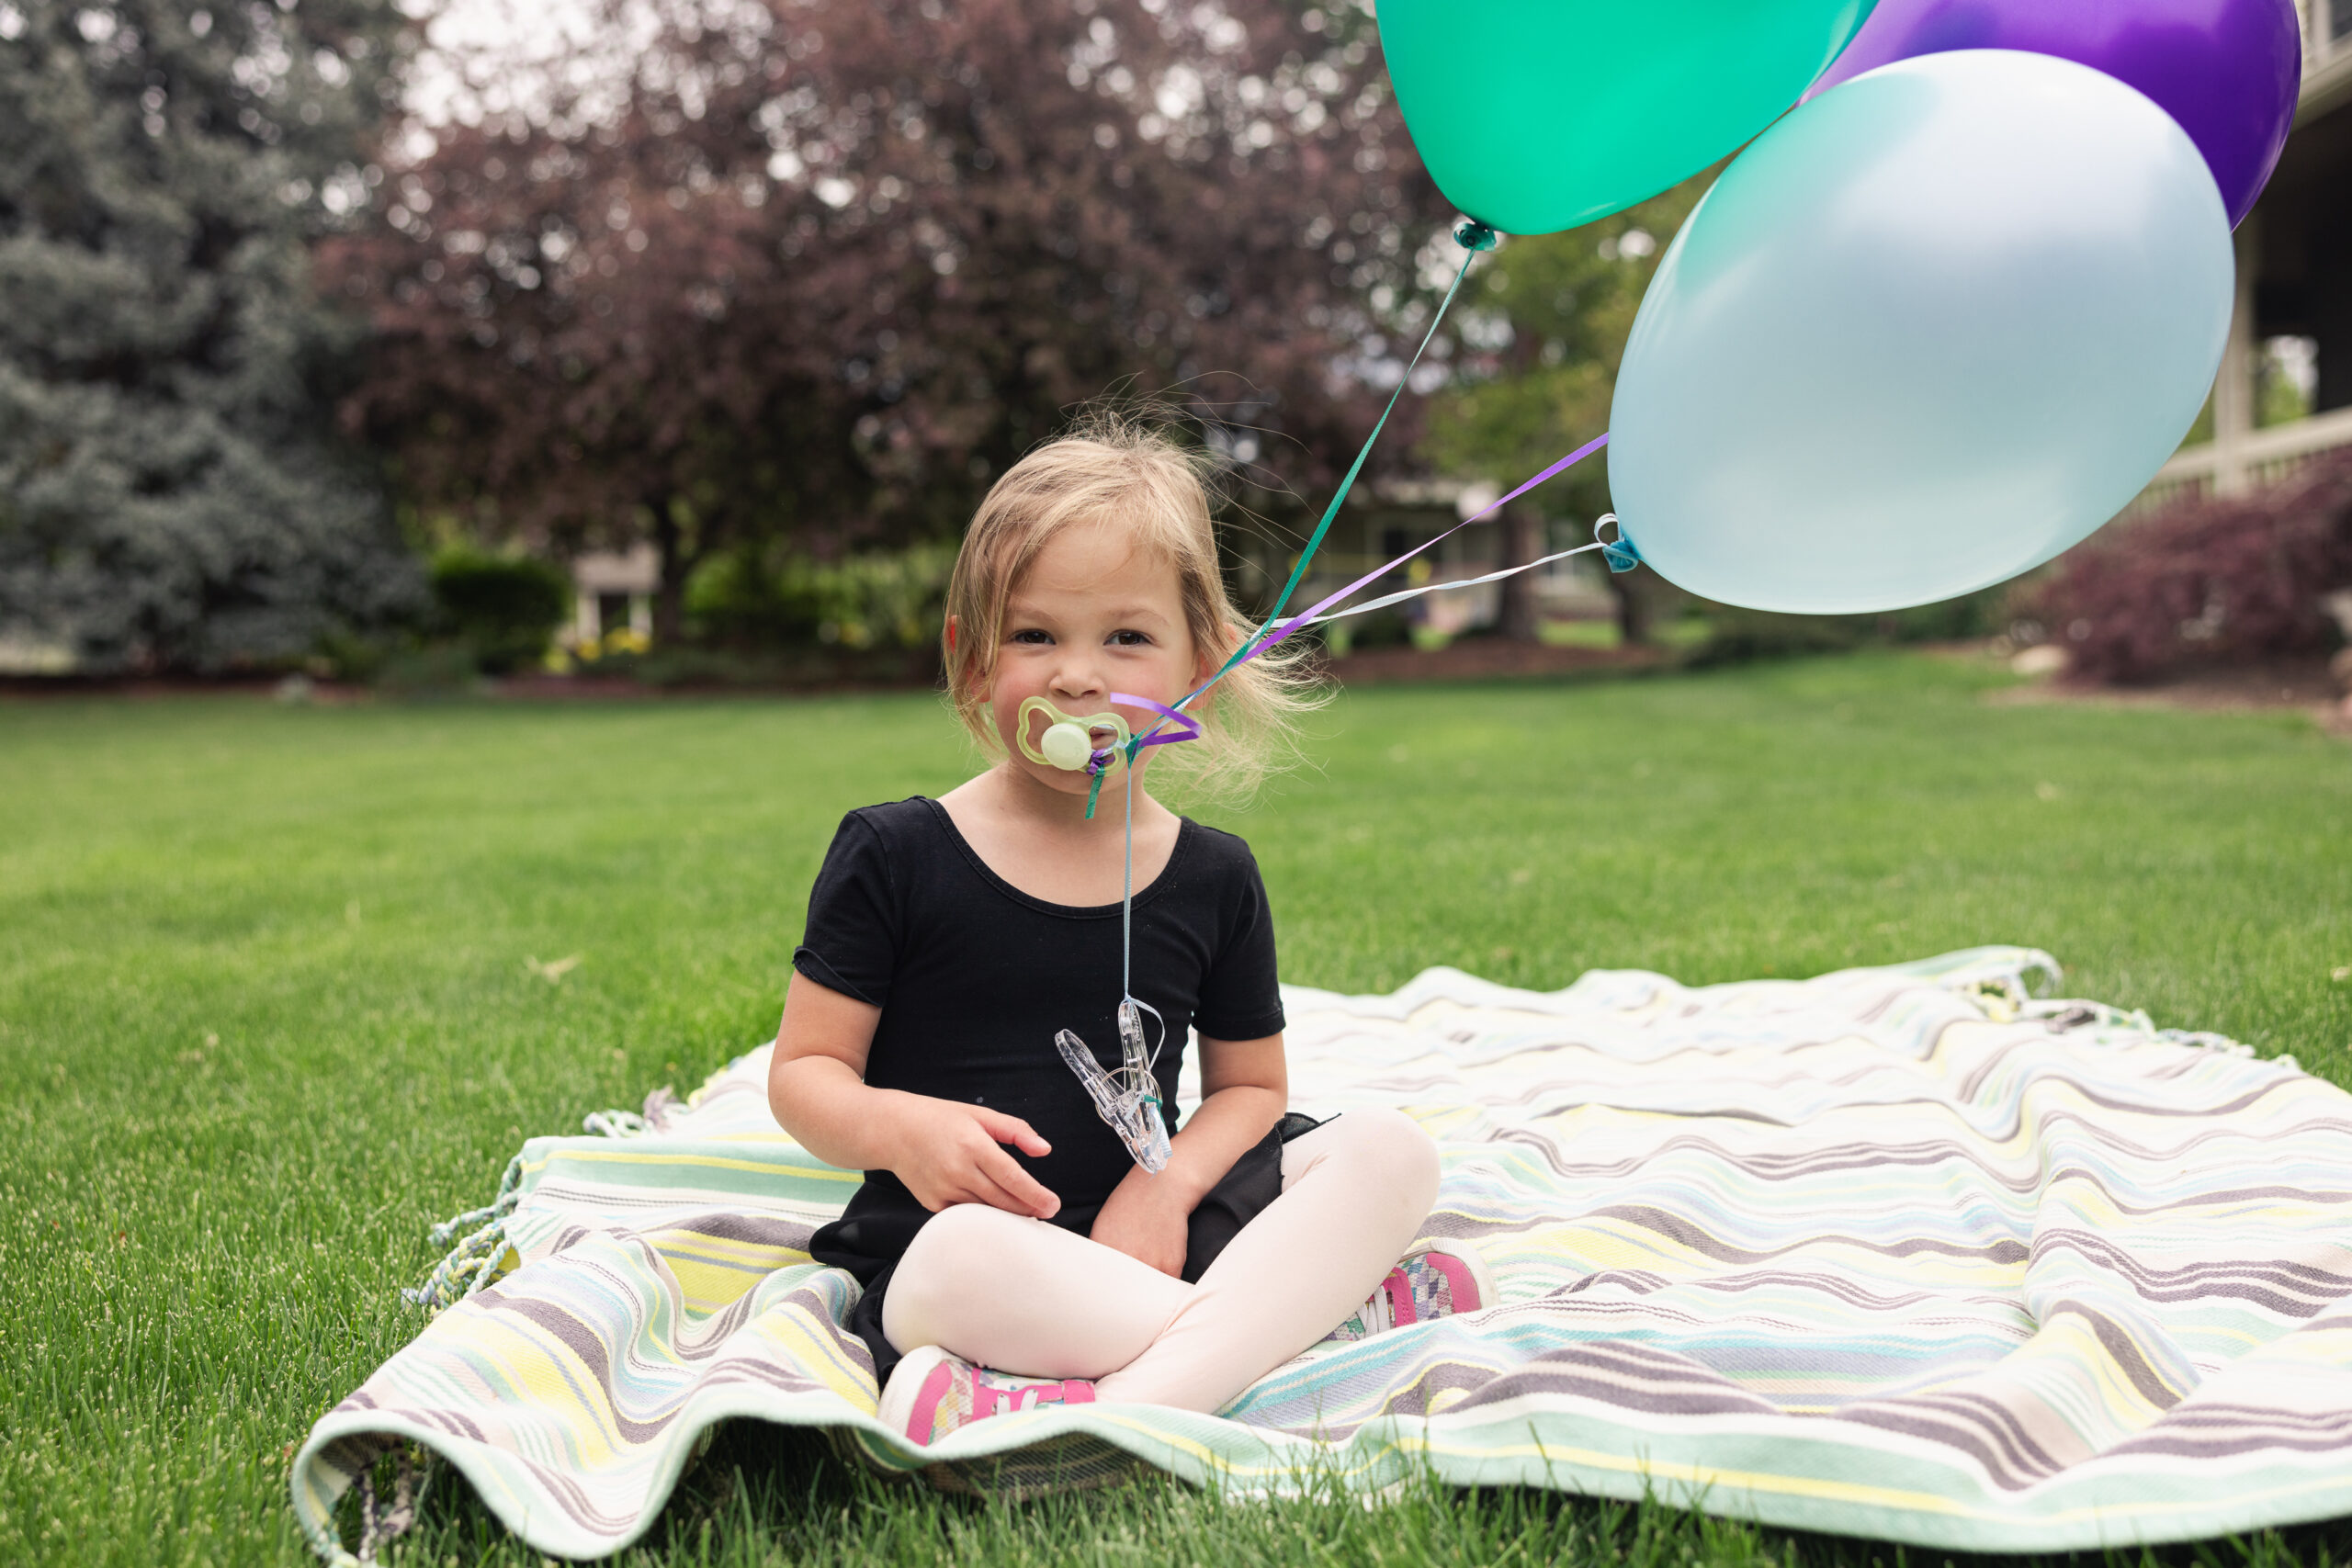 Eagle Idaho Kids Photoshoot with balloons and pacifier